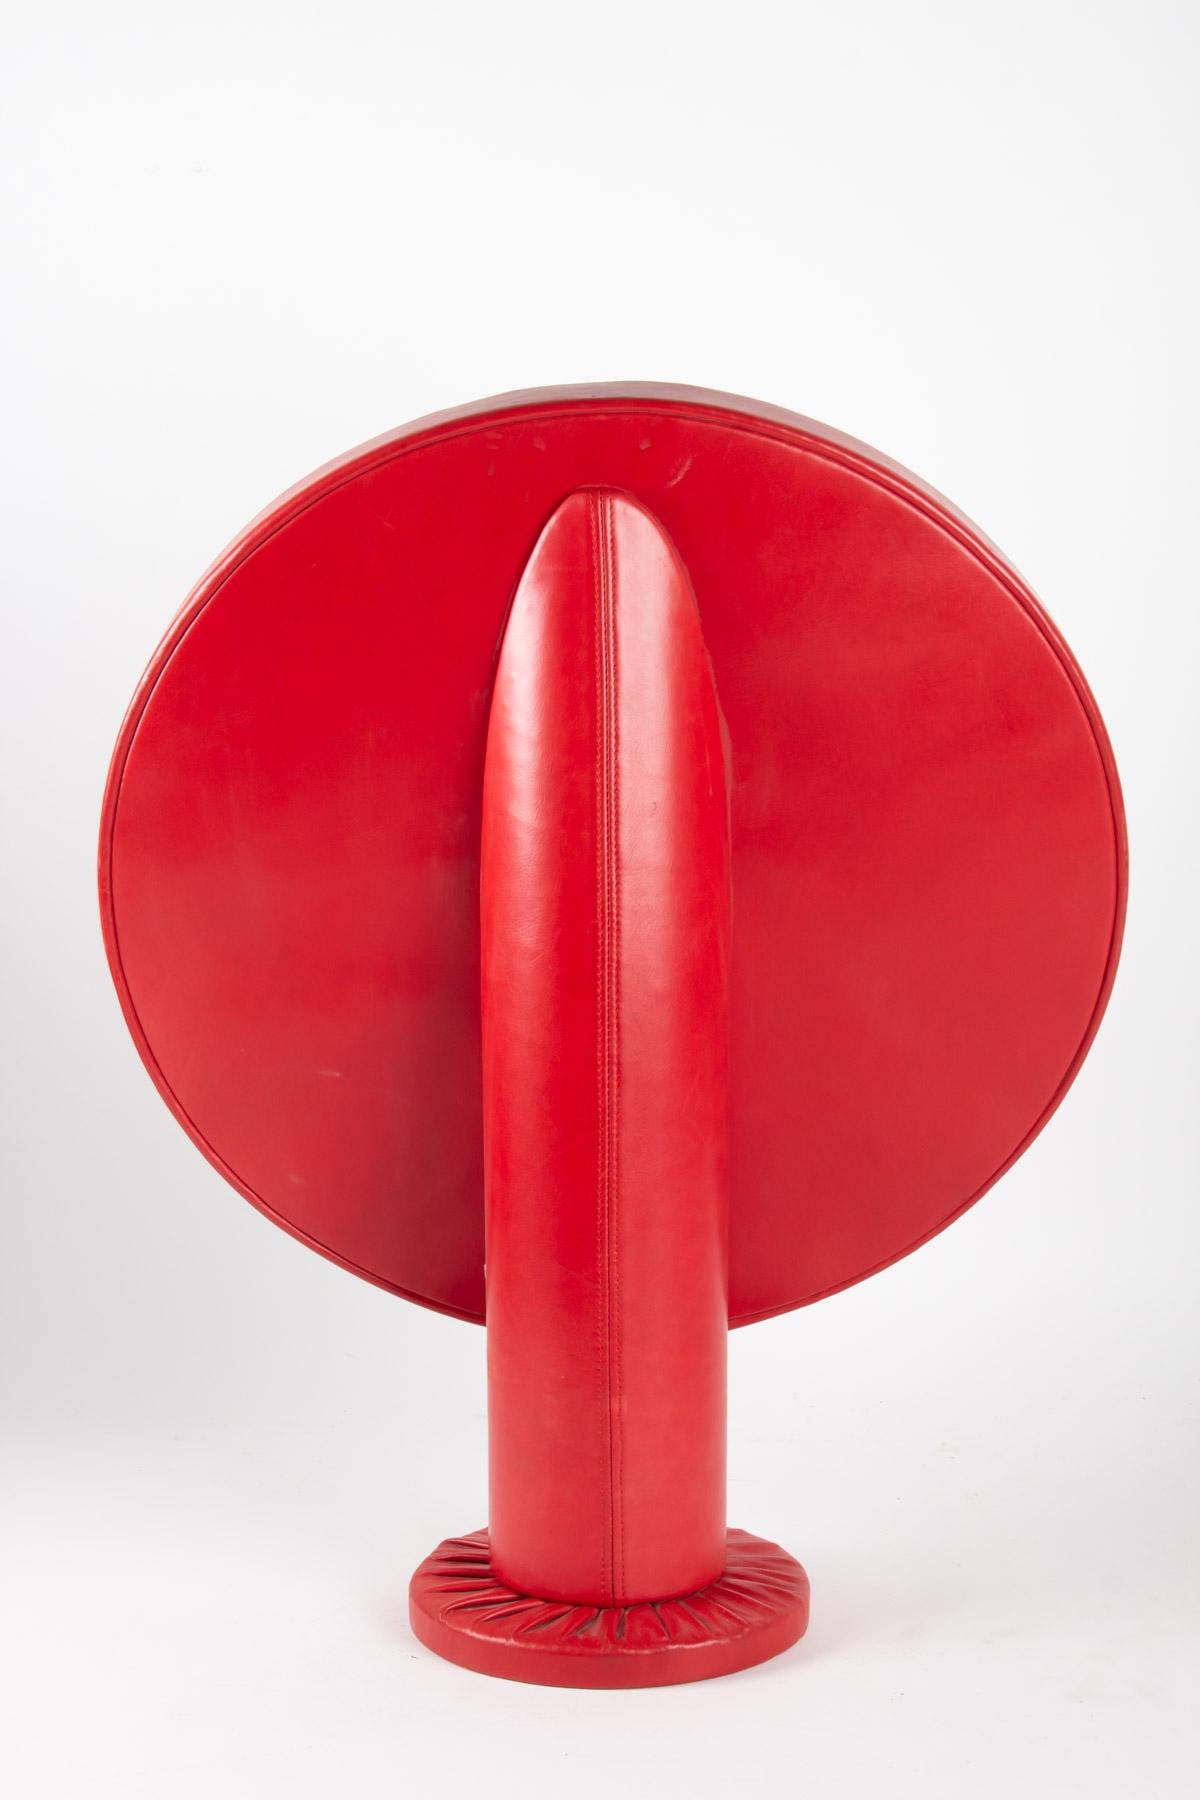 Mid-Century Modern Mirror Layers, Red Leather Coated, Design 1950, Attributed to Jacques Adnet